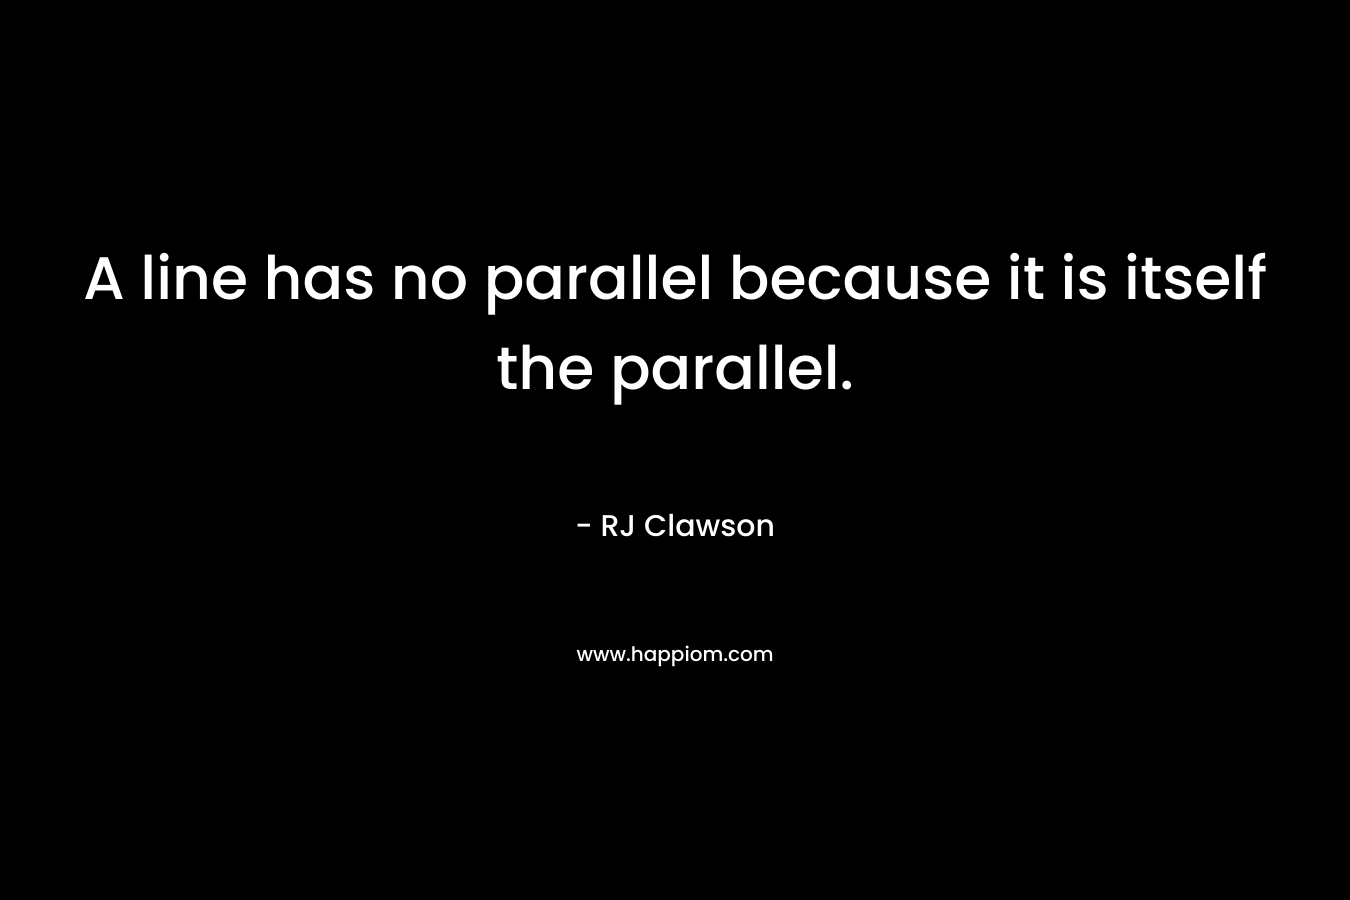 A line has no parallel because it is itself the parallel. – RJ Clawson